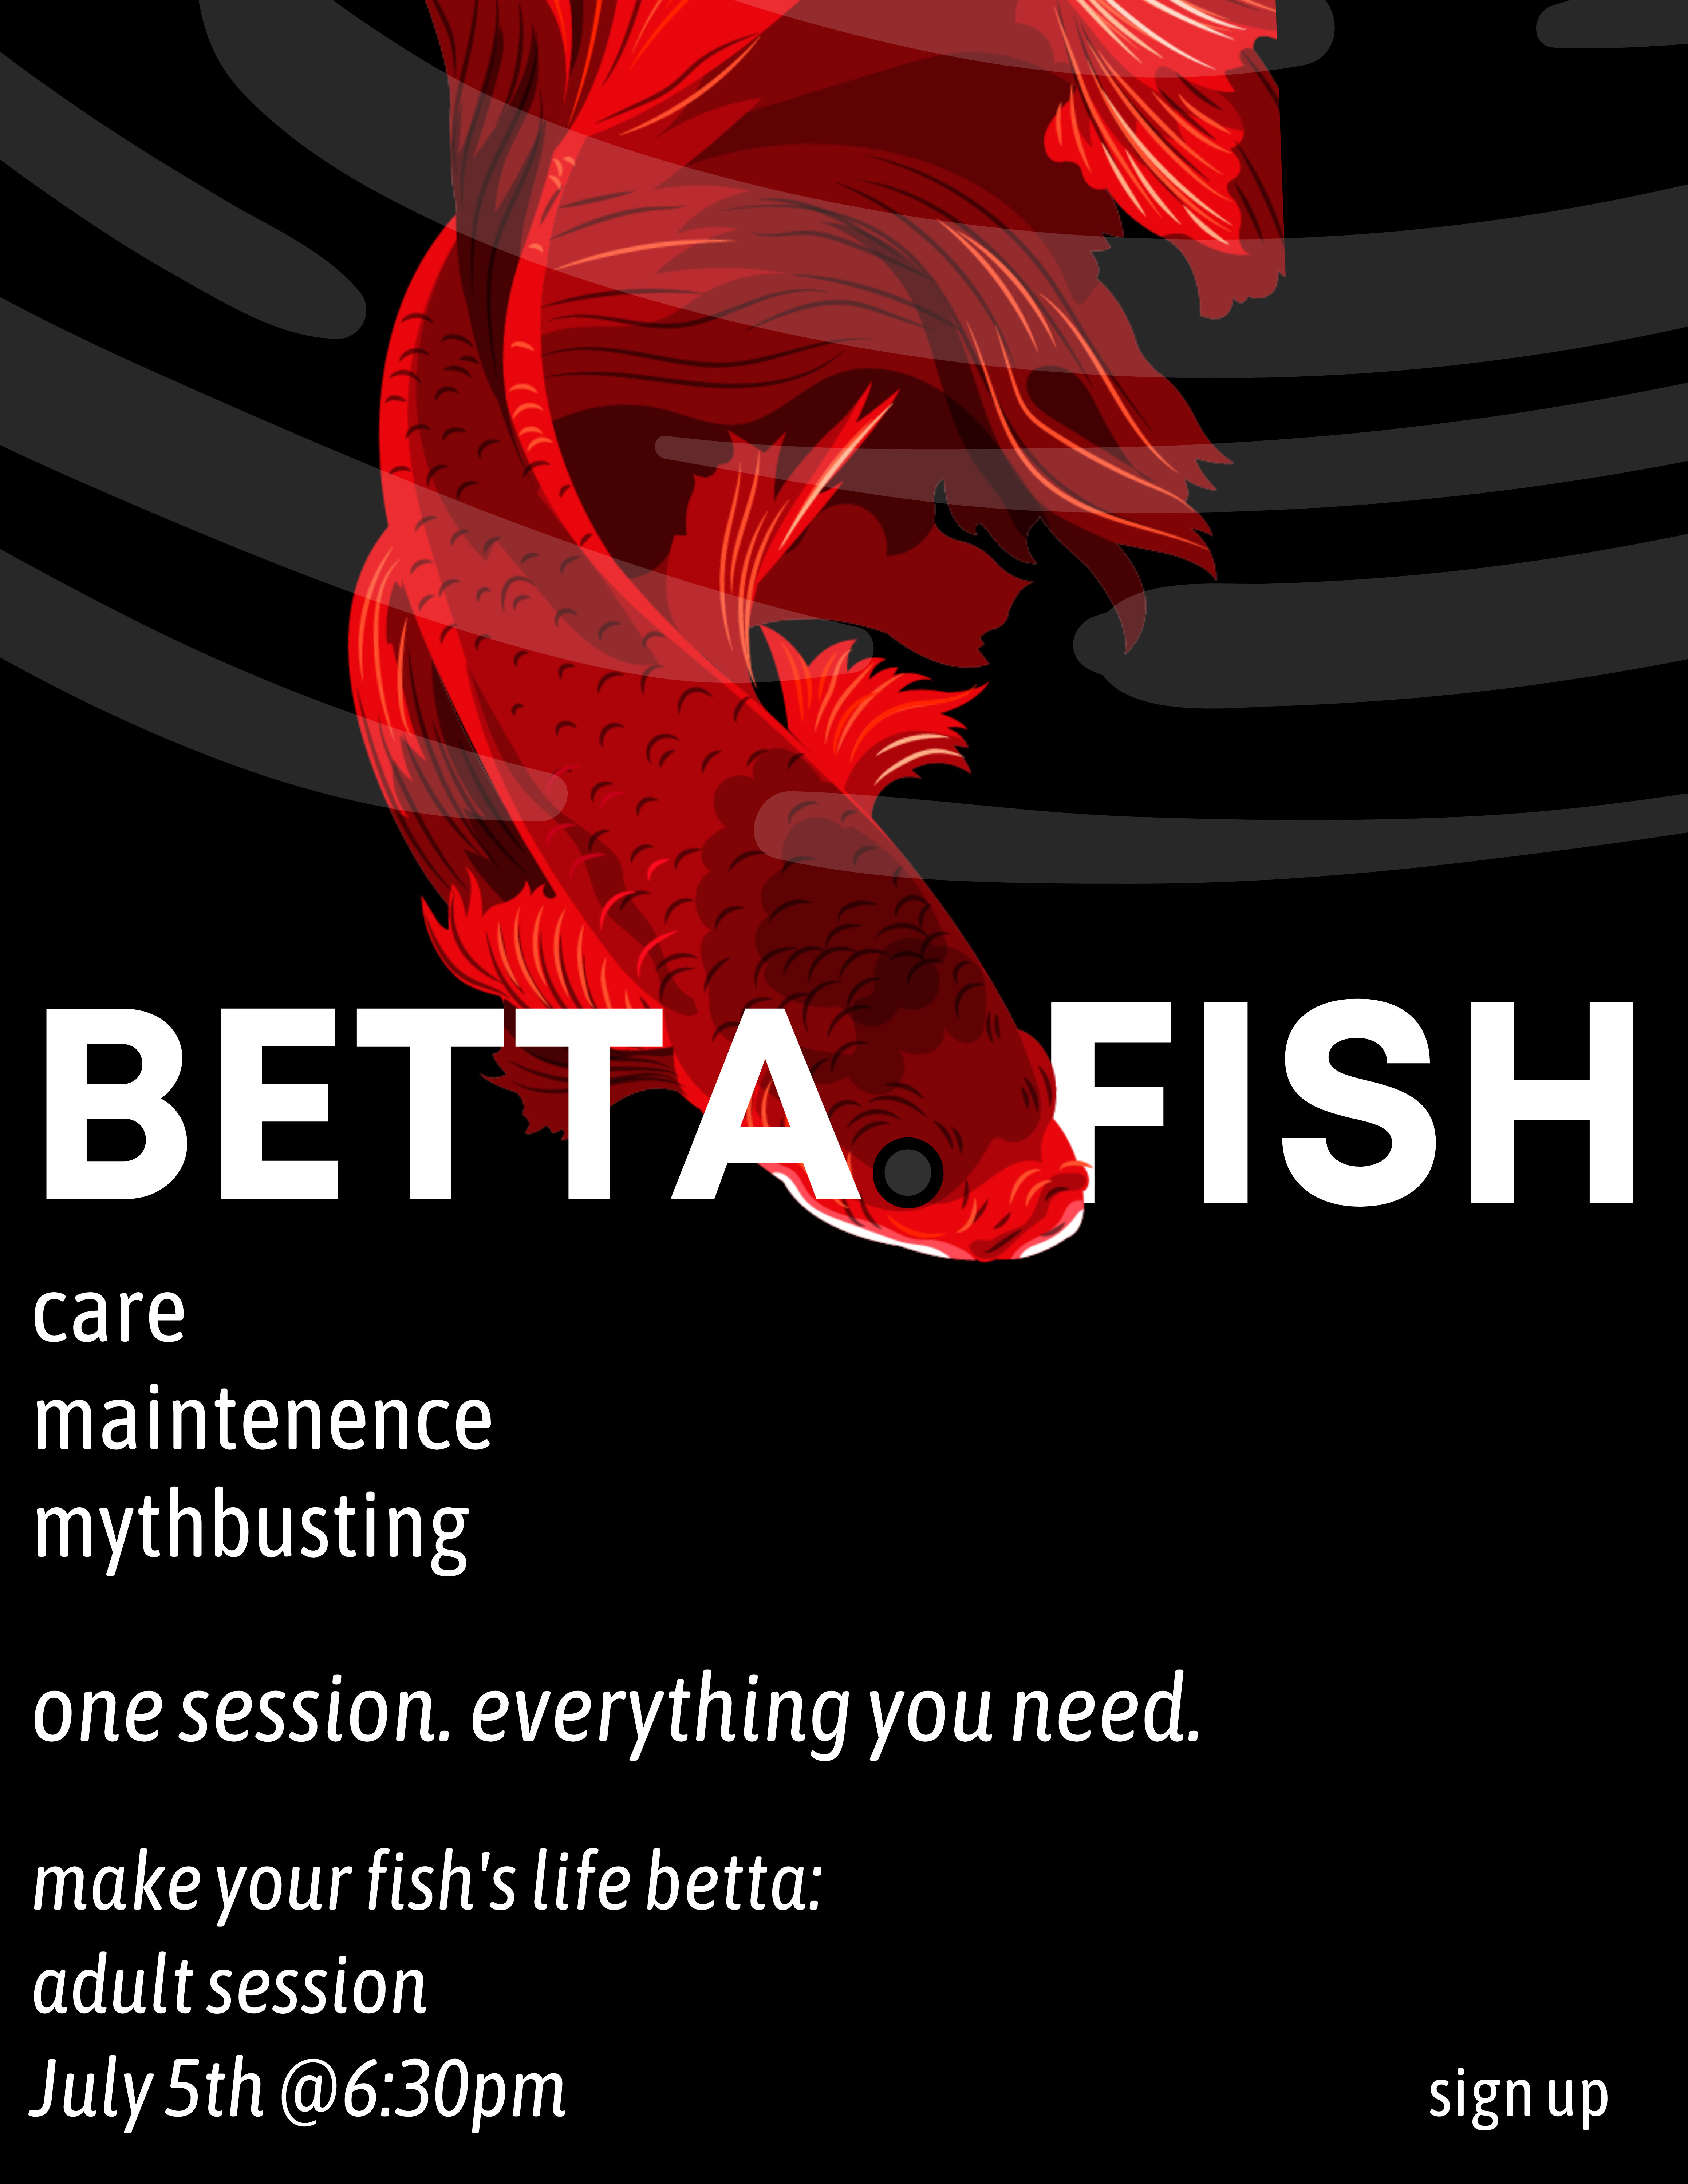 Image of a red betta fish swimming down the page with text that reads: Betta Fish care, maintenance, mythbusting. One session, everything you need. July 5th, 6:30pm.